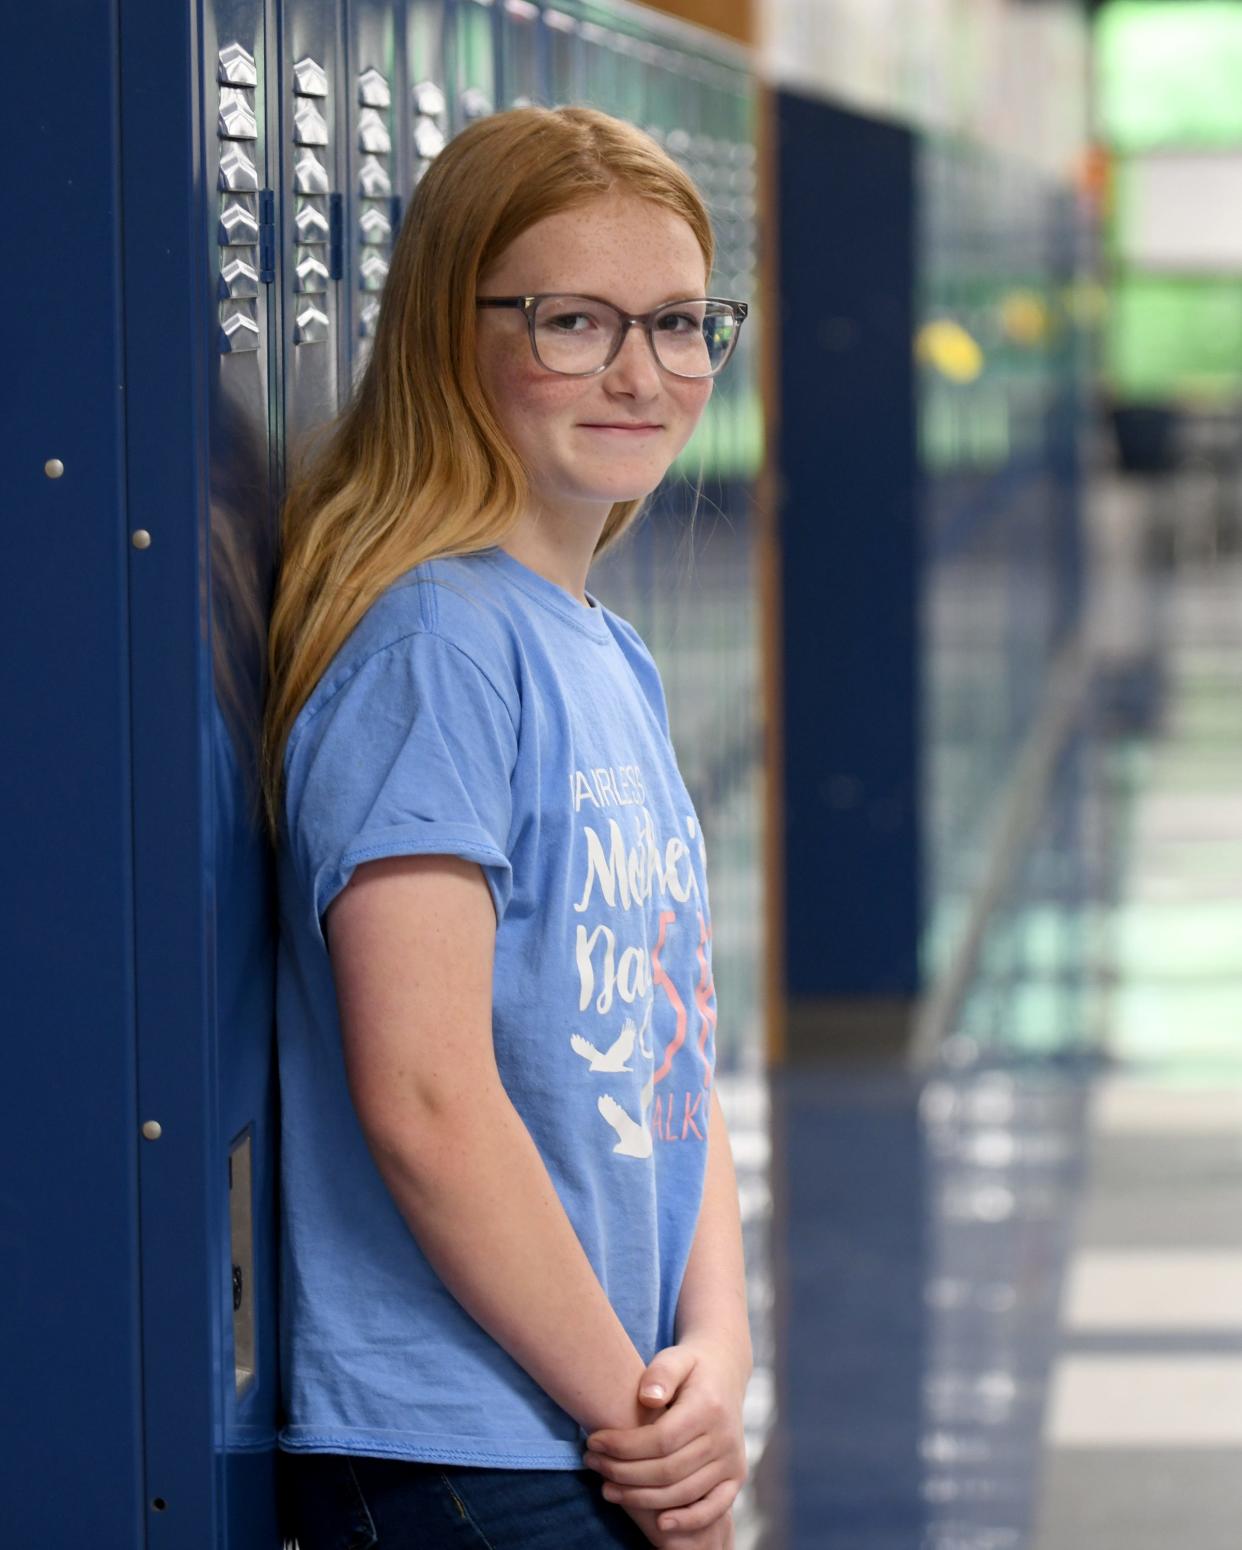 Fairless Middle School sixth grade student Ashton Haney, The Massillon Independent's Kid of Character for May.  Wednesday,  May 18, 2022.